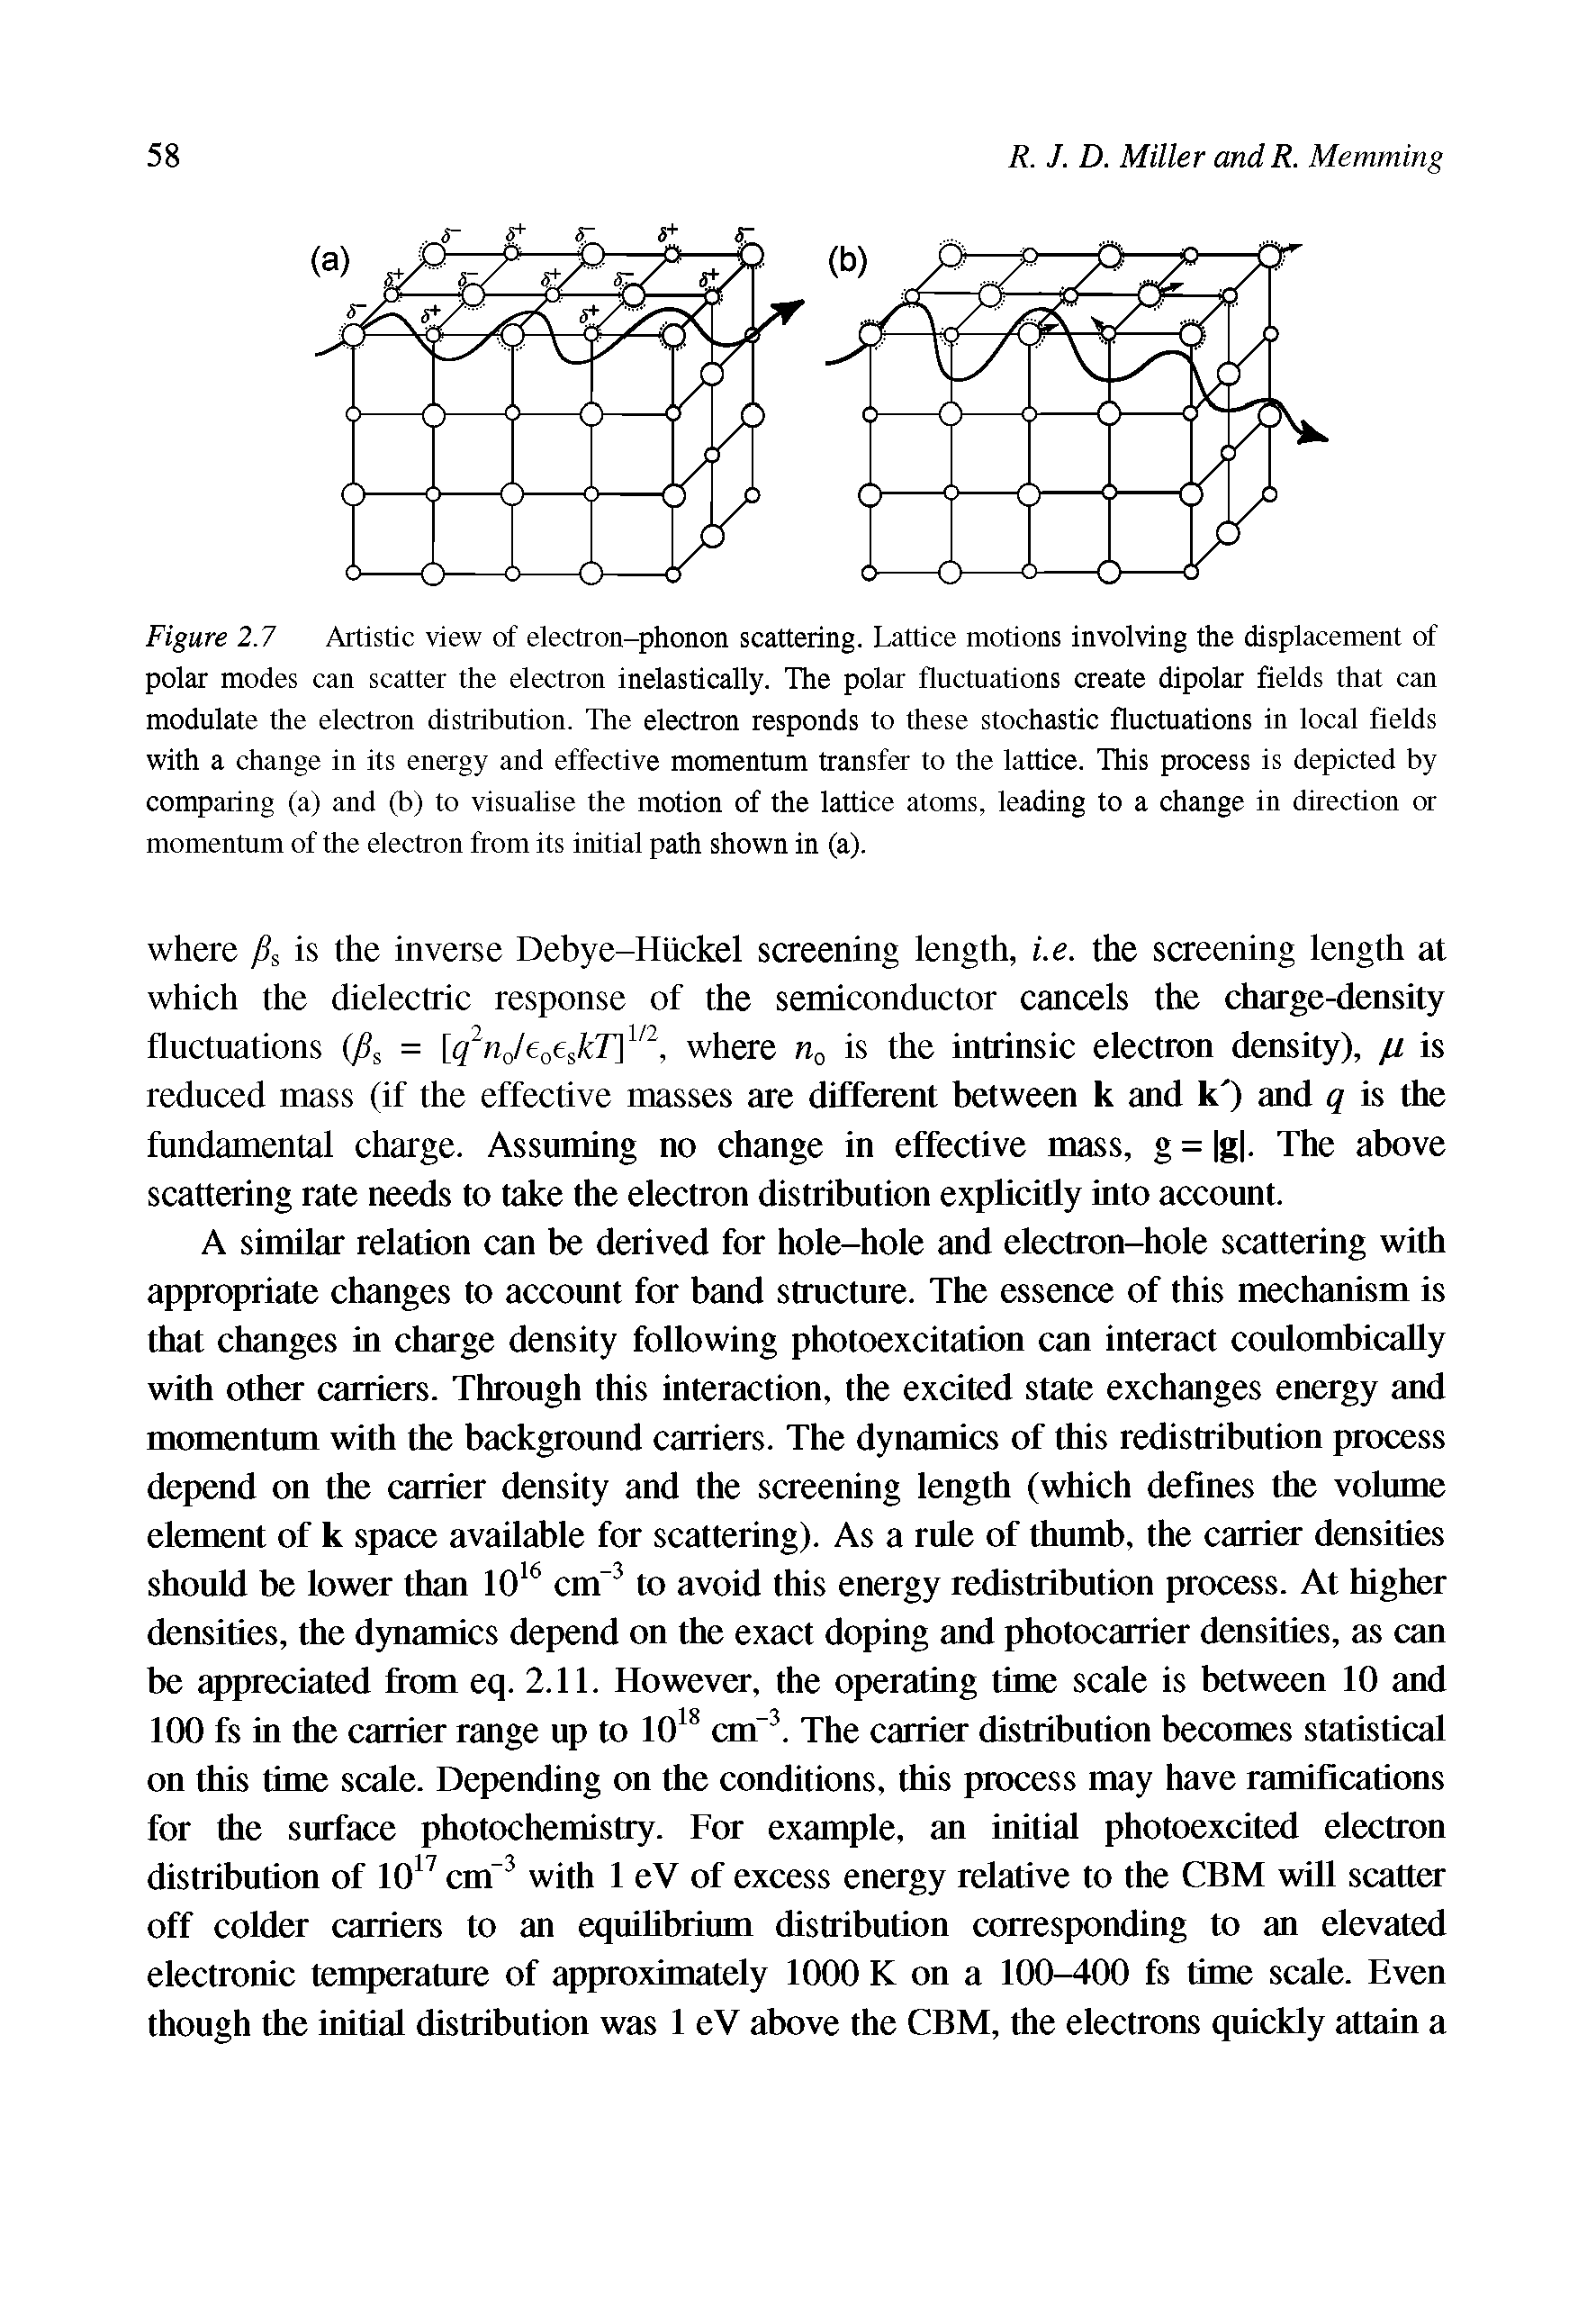 Figure 2.7 Artistic view of electron-phonon scattering. Lattice motions involving the displacement of polar modes can scatter the electron inelastically. The polar fluctuations create dipolar fields that can modulate the electron distribution. The electron responds to these stochastic fluctuations in local fields with a change in its energy and effective momentum transfer to the lattice. This process is depicted by comparing (a) and (b) to visualise the motion of the lattice atoms, leading to a change in direction or momentum of the electron from its initial path shown in (a).